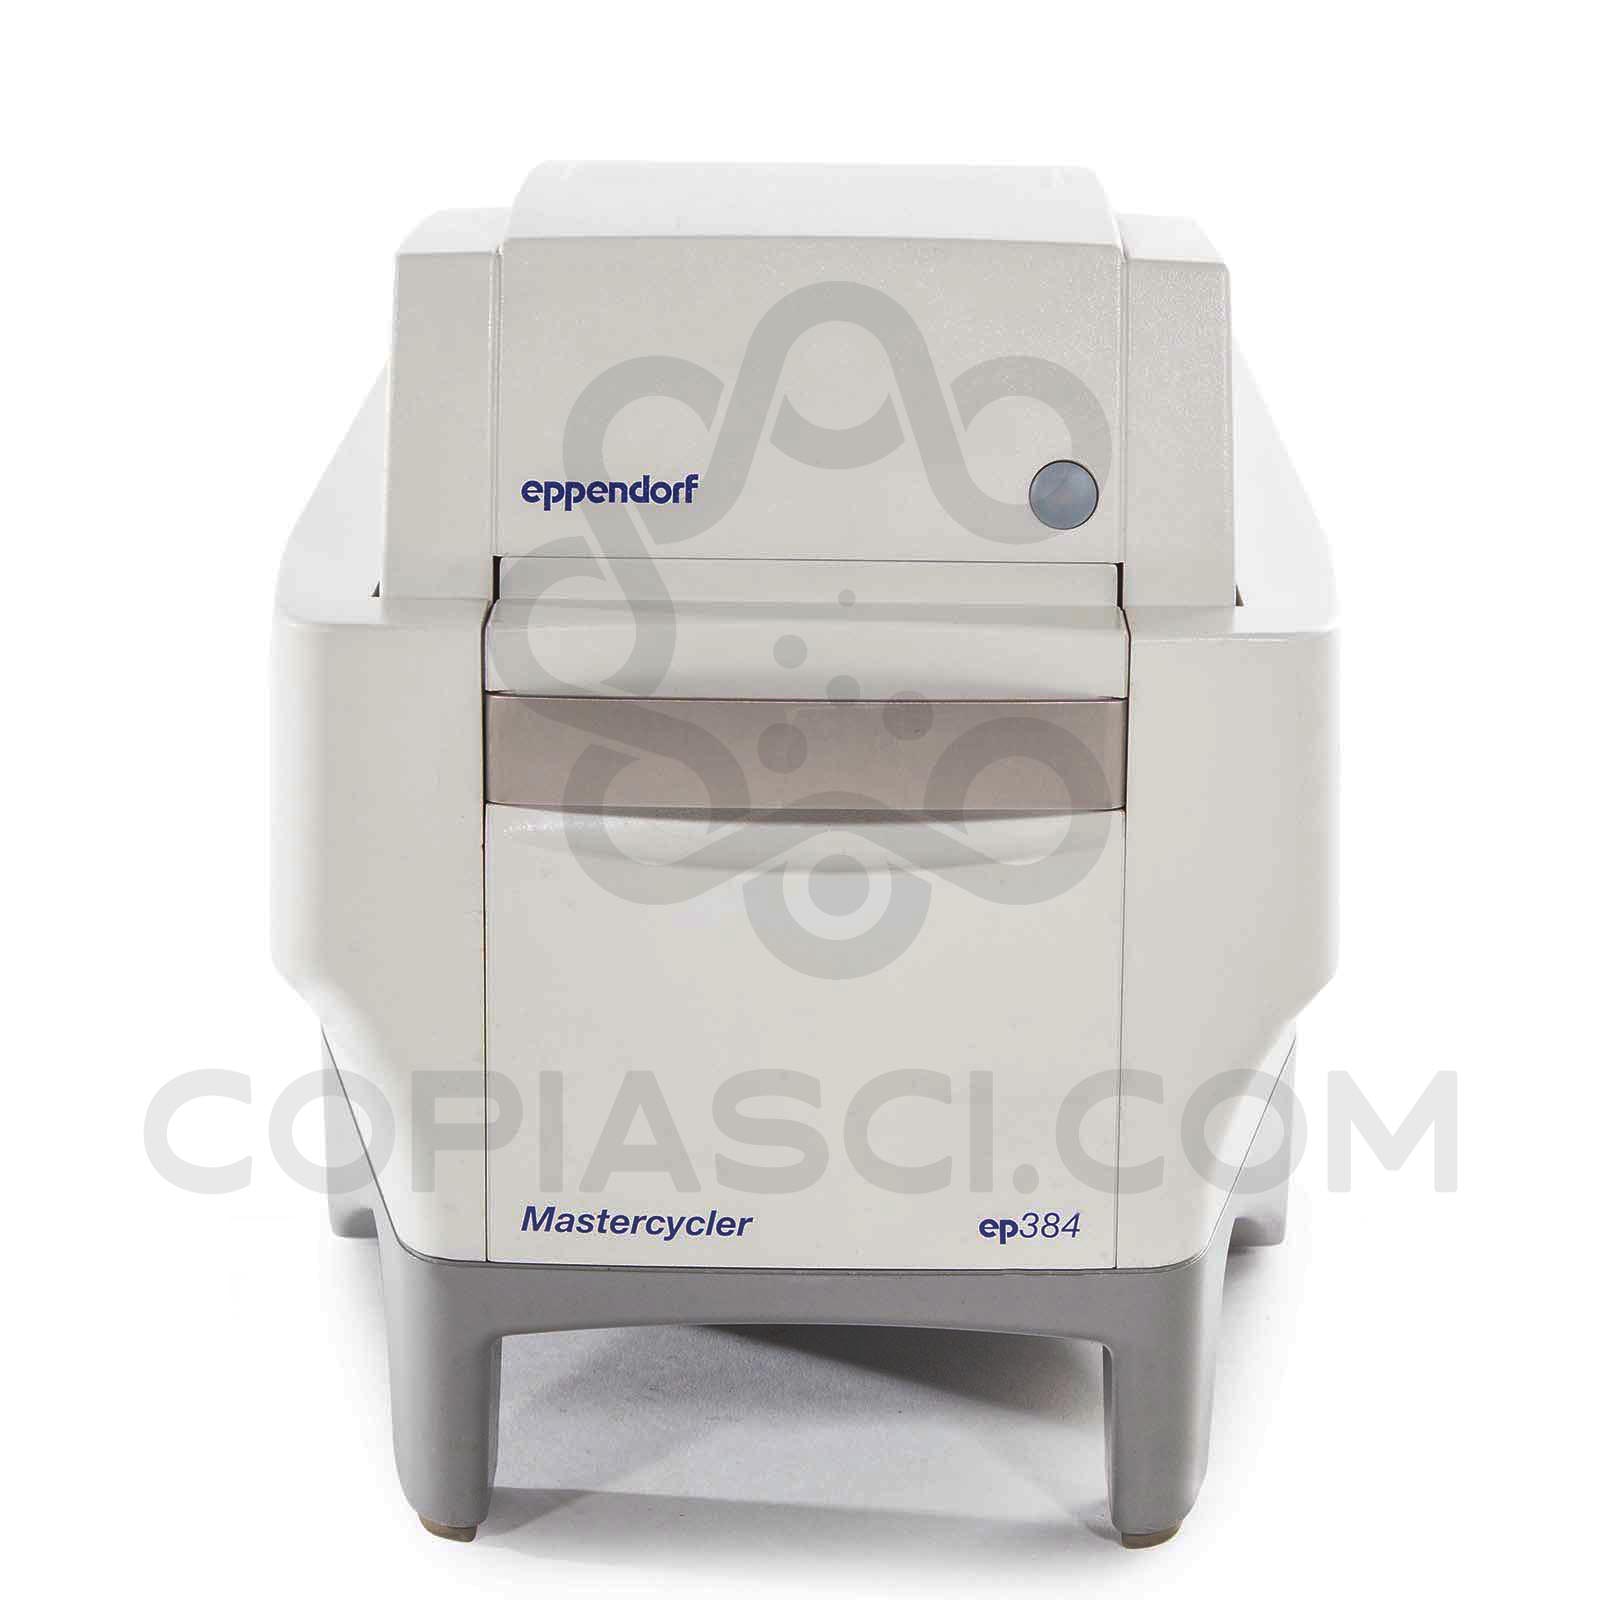 Eppendorf Thermal Cycler Mastercycler ep 384